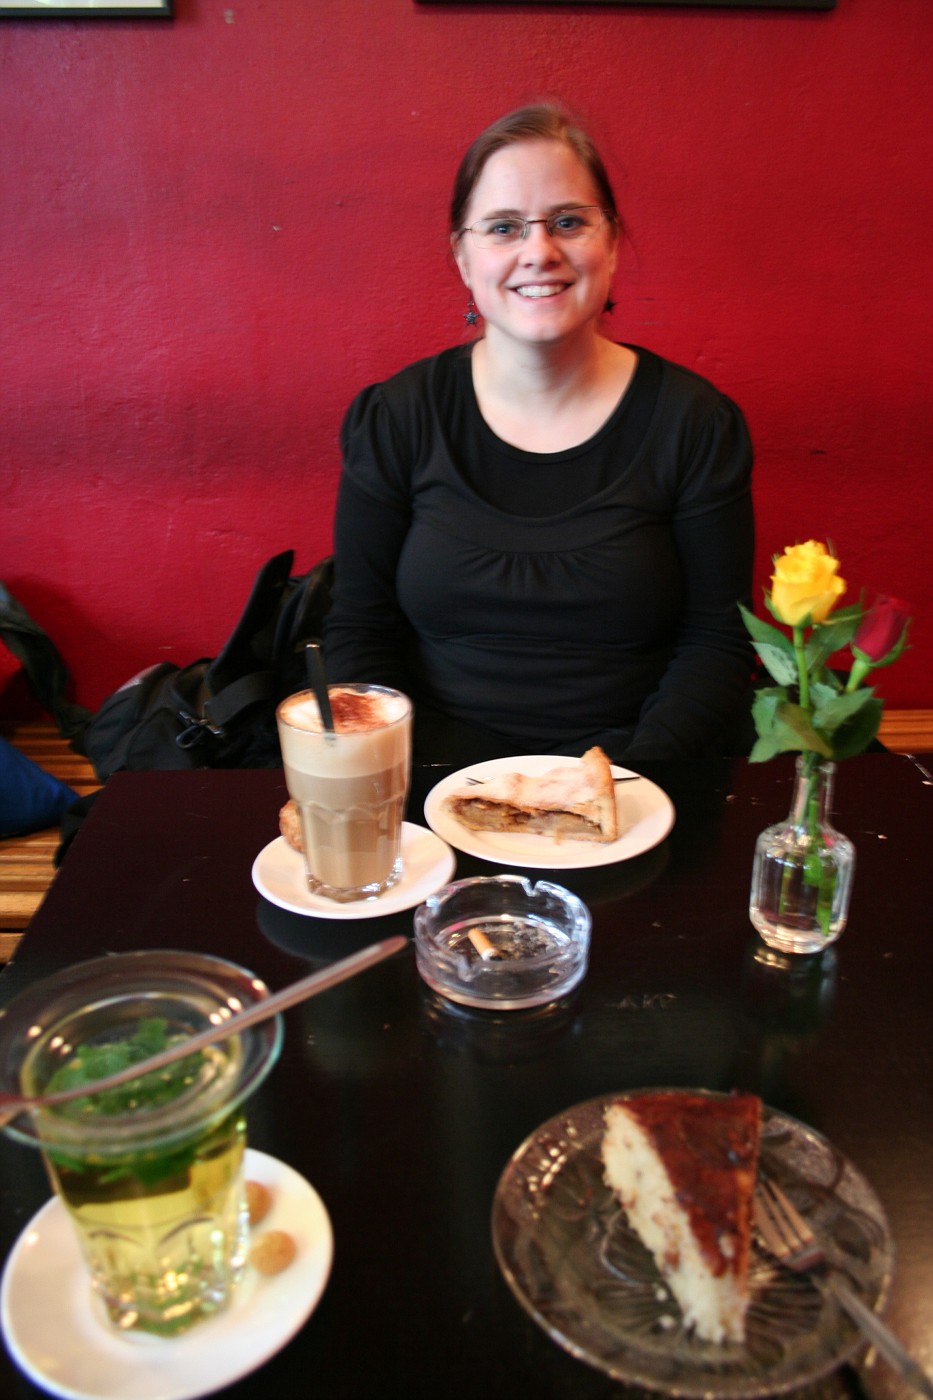 A woman siting behind a table. The wall behind her is red. On the table in front of her there are coffee and cakes.